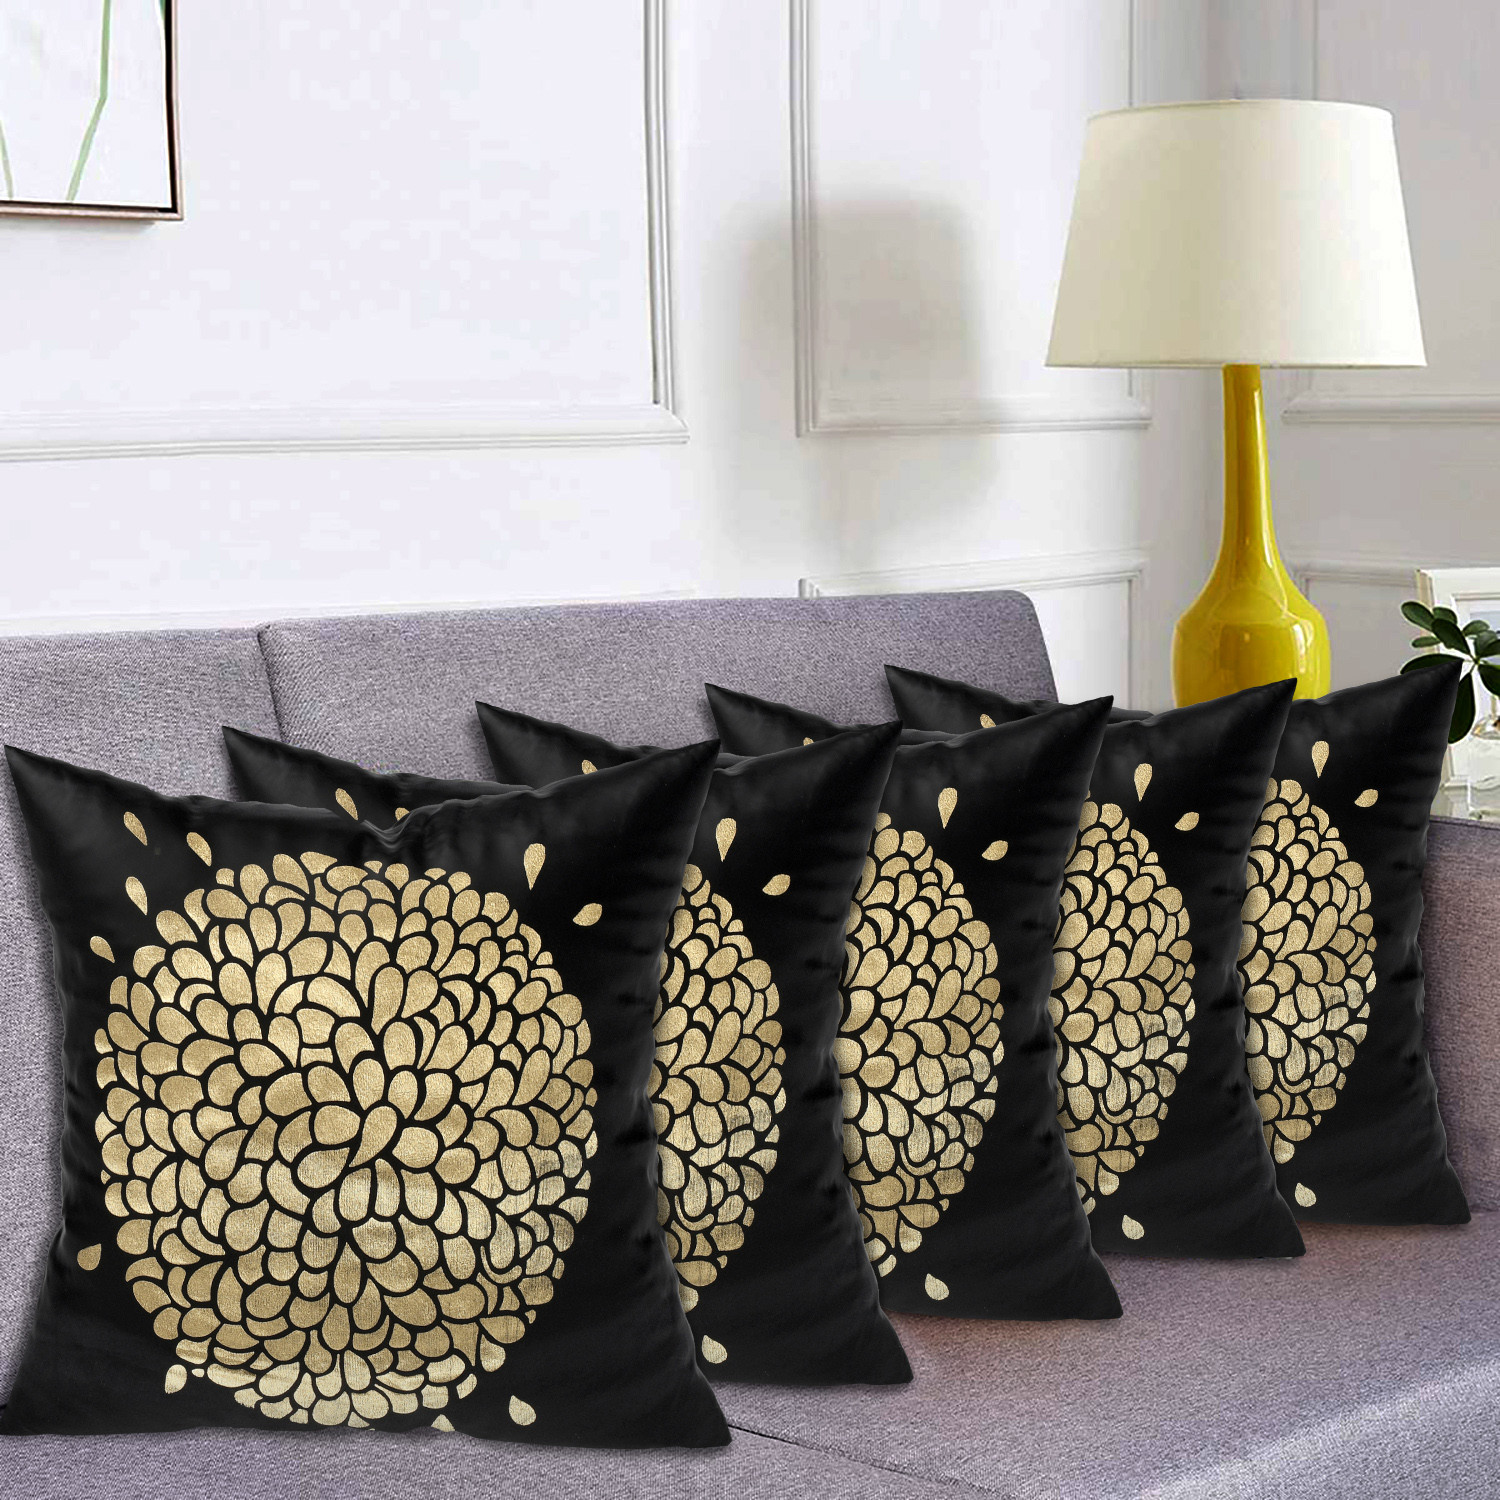 Kuber Industries Rangoli Print Soft Decorative Square Cushion Cover, Cushion Case For Sofa Couch Bed 16x16 Inch-(Black)